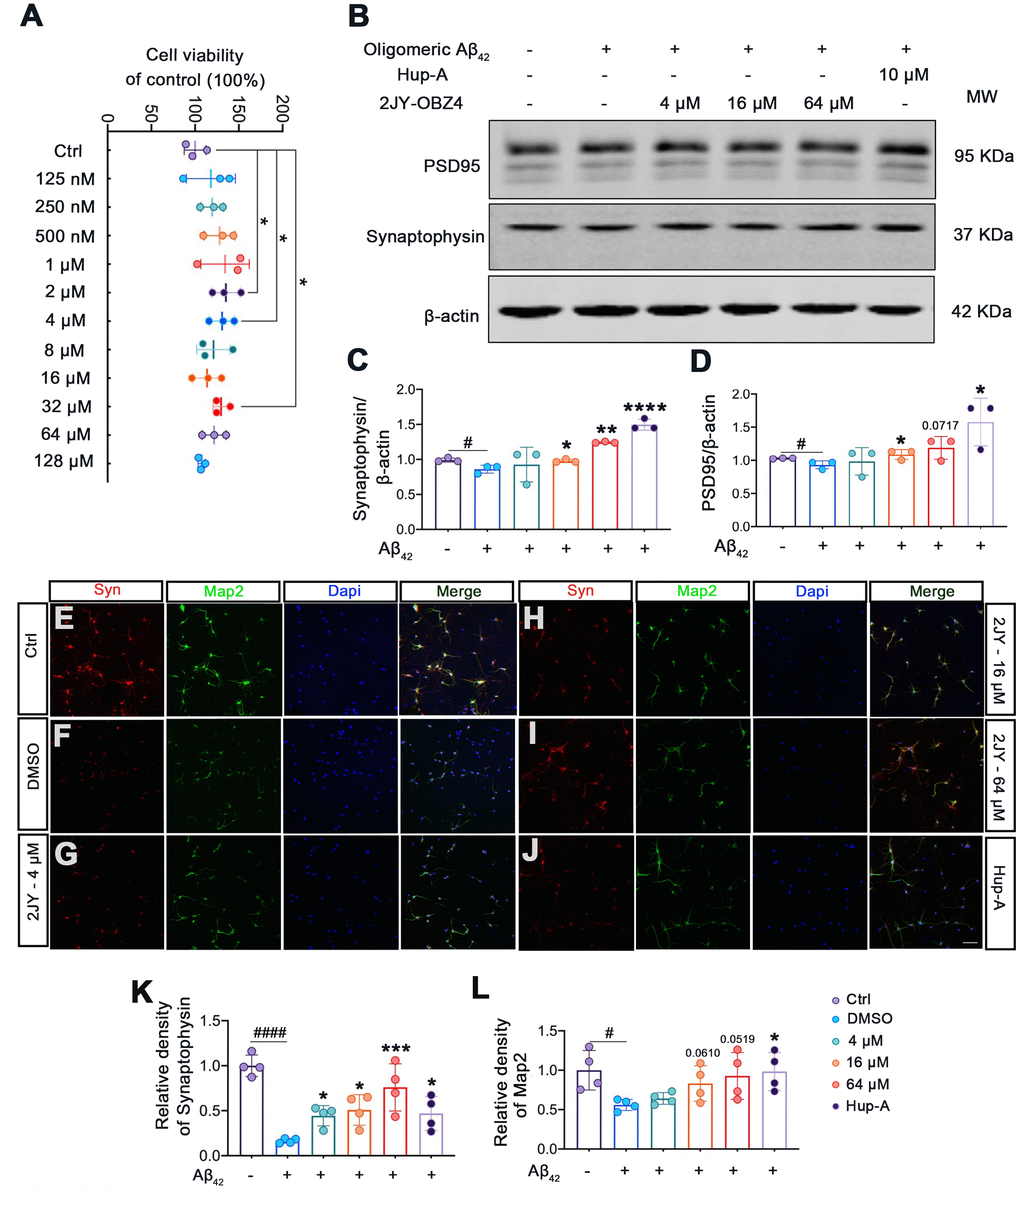 2JY-OBZ4 ameliorated human oligomeric Aβ42 induced synaptic loss in mice primary neuron. (A) CCK-8 assay of mice primary neuron incubated with various concentrations of 2JY-OBZ4 (0 nM, 125 nM, 250 nM, 500 nM, 1μM, 2 μM, 4 μM, 8 μM, 16 μM, 32 μM, 64 μM, 128 μM) for 24 h. n = 3 per group. p value significance is calculated from a one-way ANOVA, data are represented as mean ± SEM. *p B) Western blots and (C, D) quantitative analysis for synaptophysin and PSD95 in mice primary neuron. MW Molecular weight. n = 3 per group. #p E–J) Immunofluorescence staining was used to measure the expression of synaptophysin and Map2 in primary neuron (scale bar: 50 μm). (K, L) Quantitative analysis of fluorescence intensity. n = 4 per group. p value significance is calculated from a one-way ANOVA, data are represented as mean ± SEM. #p 